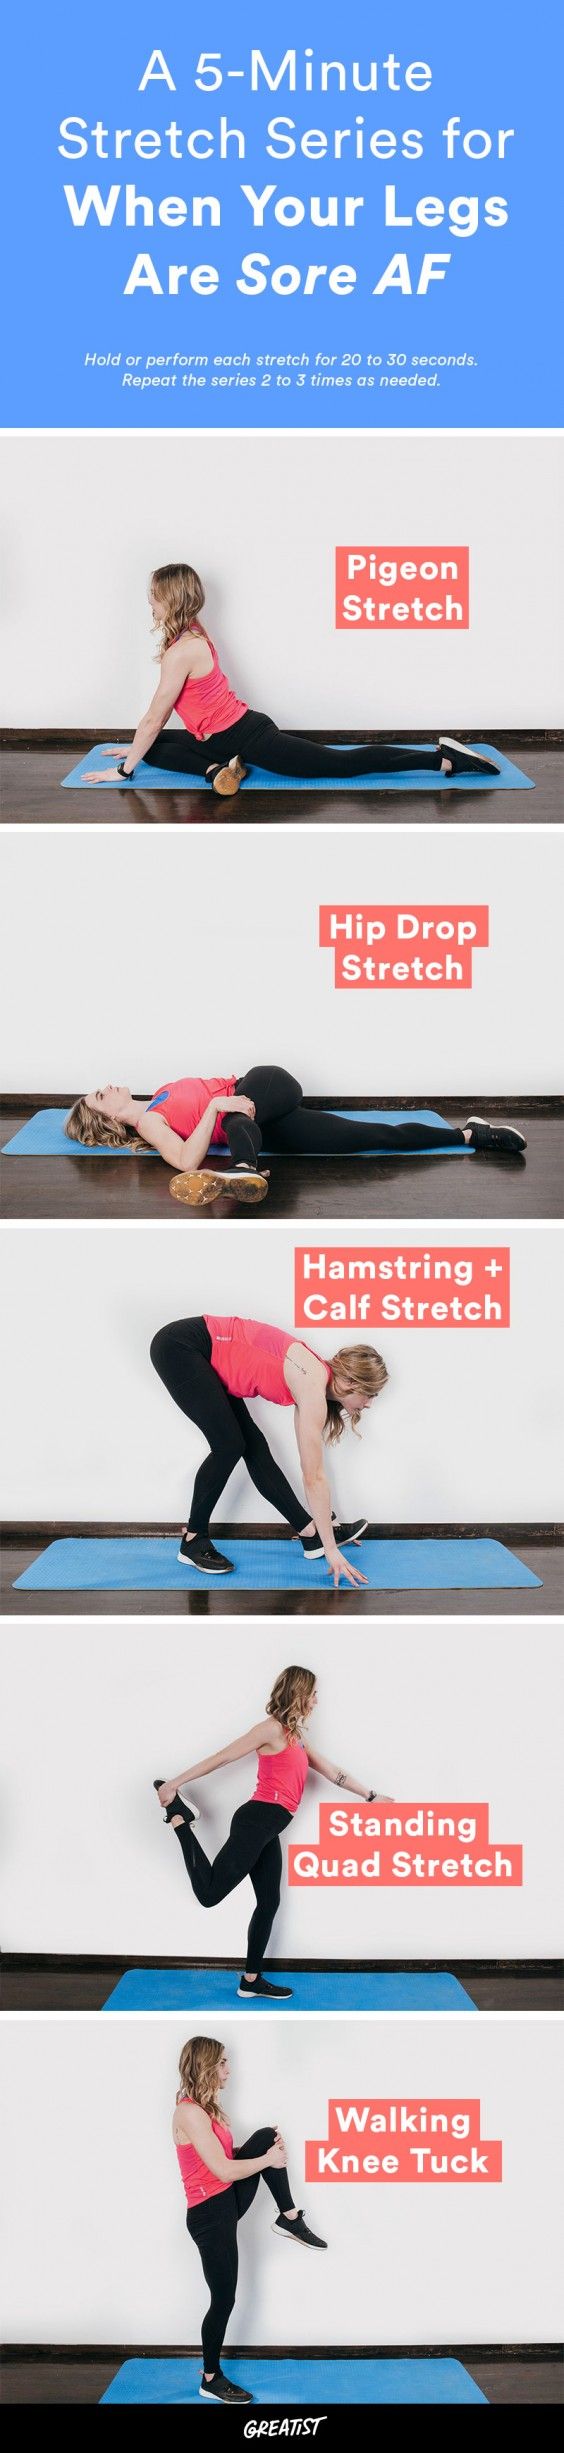 The Stretching Poster  Post workout stretches, Body stretches, Full body  stretch